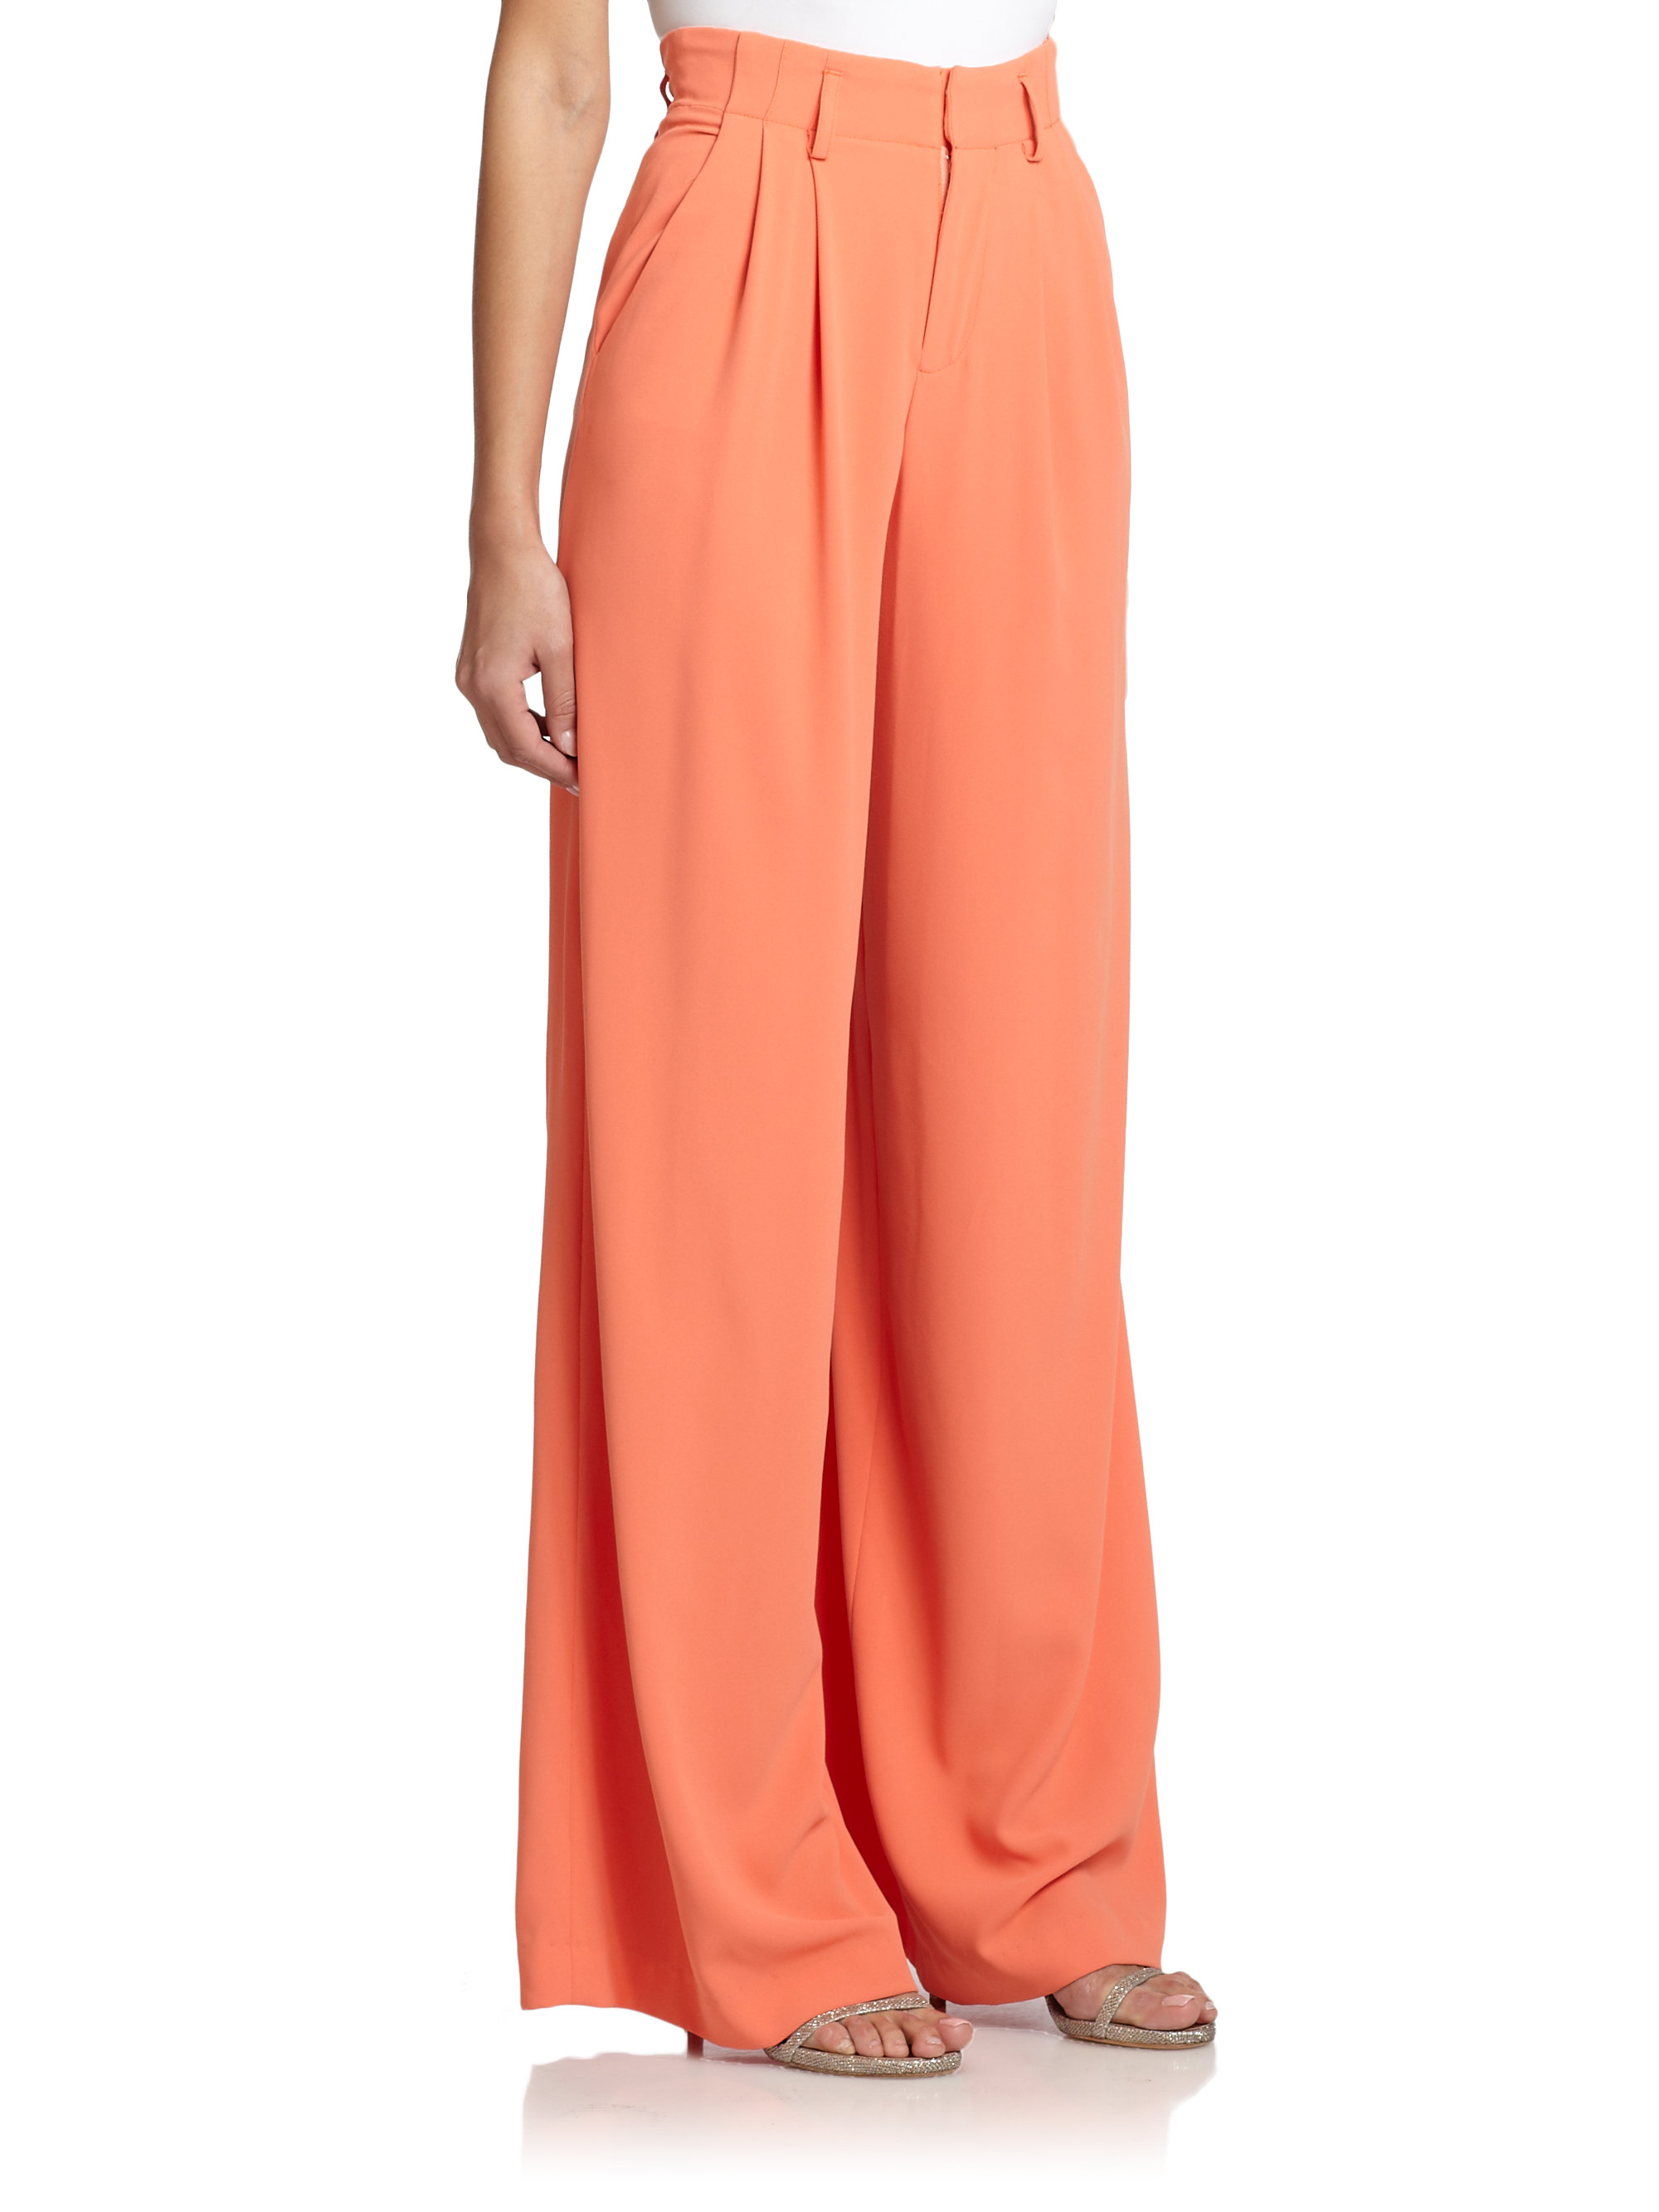 Alice + Olivia High-Waisted Wide-Leg Pants in Coral (Pink) - Lyst